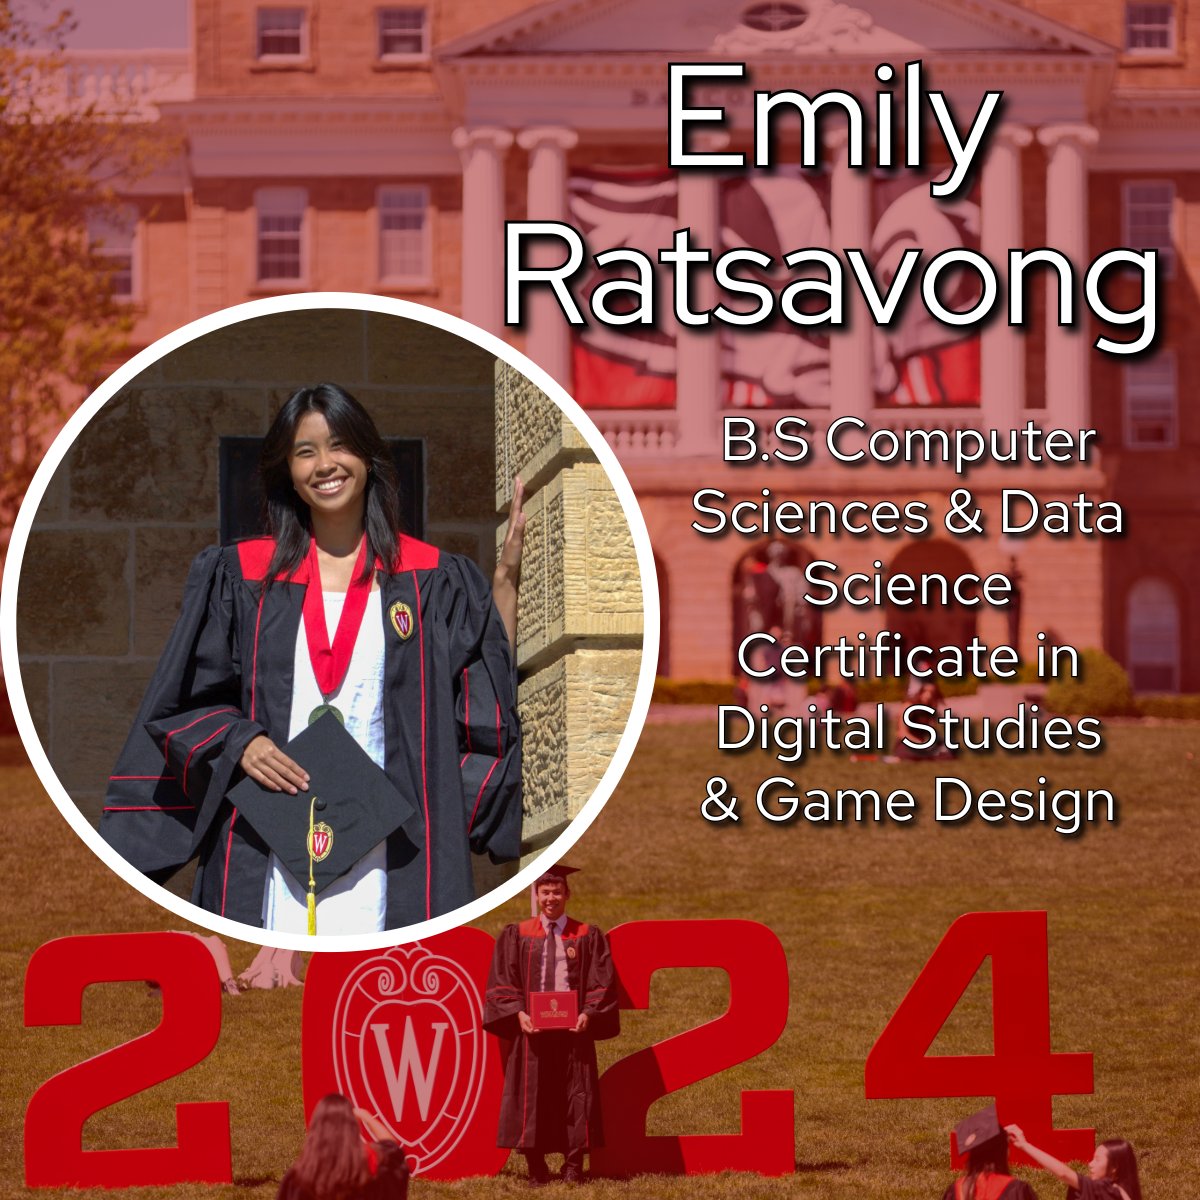 Meet Emily Ratsavong, a graduating senior in @WisconsinCS and @UWMadisonSTATS who is ready to address problems at the intersection of technology and data. After she graduates she will join @alliantenergy as an Enterprise Application Developer. cdis.wisc.edu/commencement-2… #uwgrad